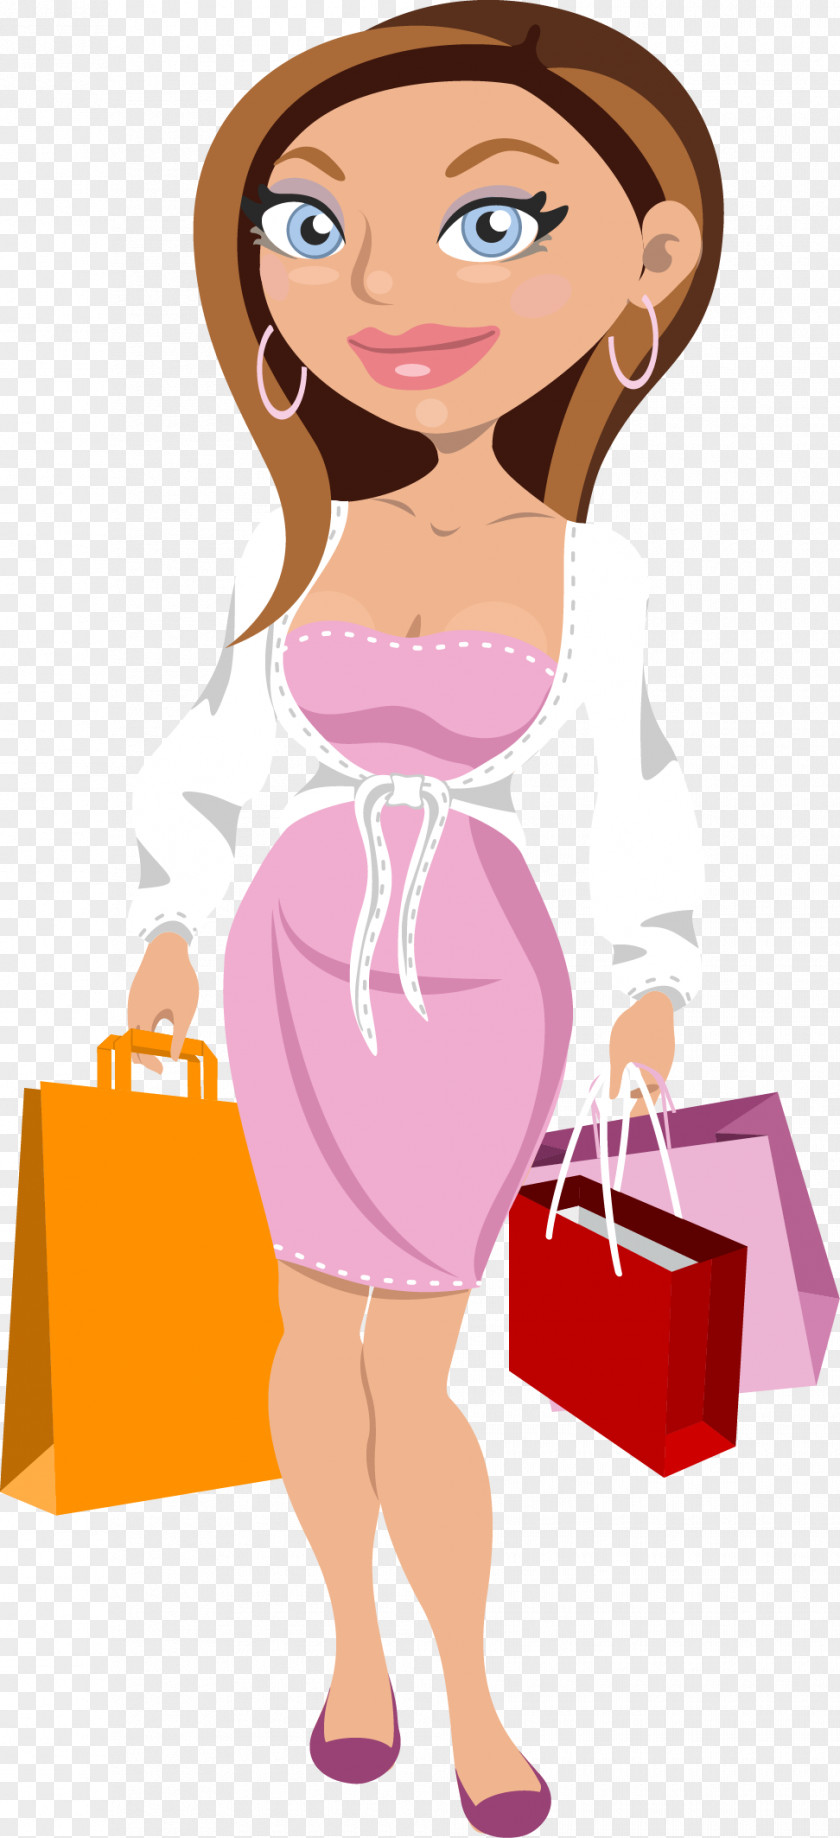 Vector Hand-painted Shopping Woman Illustration PNG